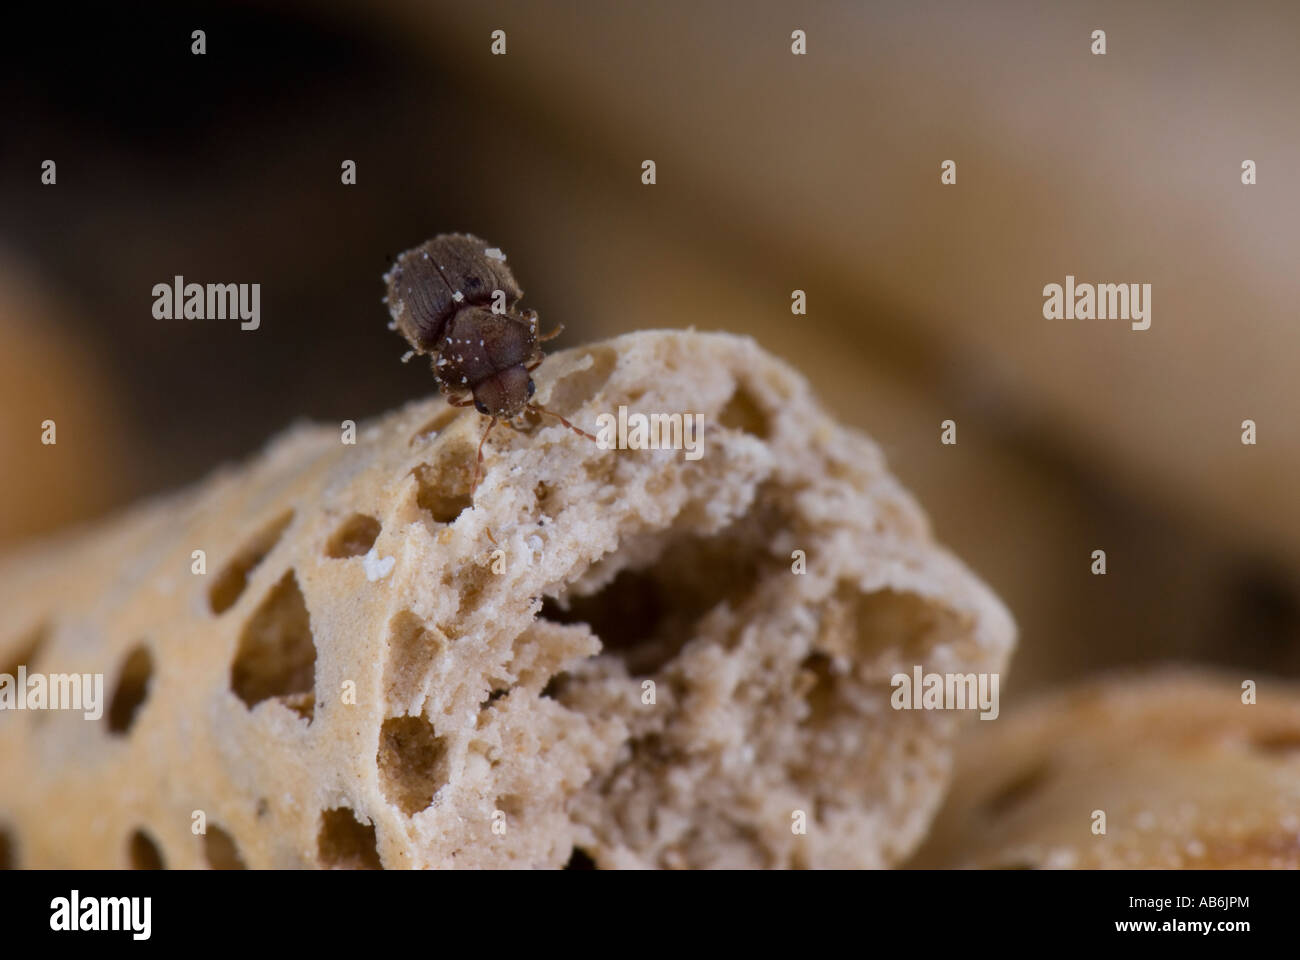 Biscuit beetle on biscuit Stock Photo